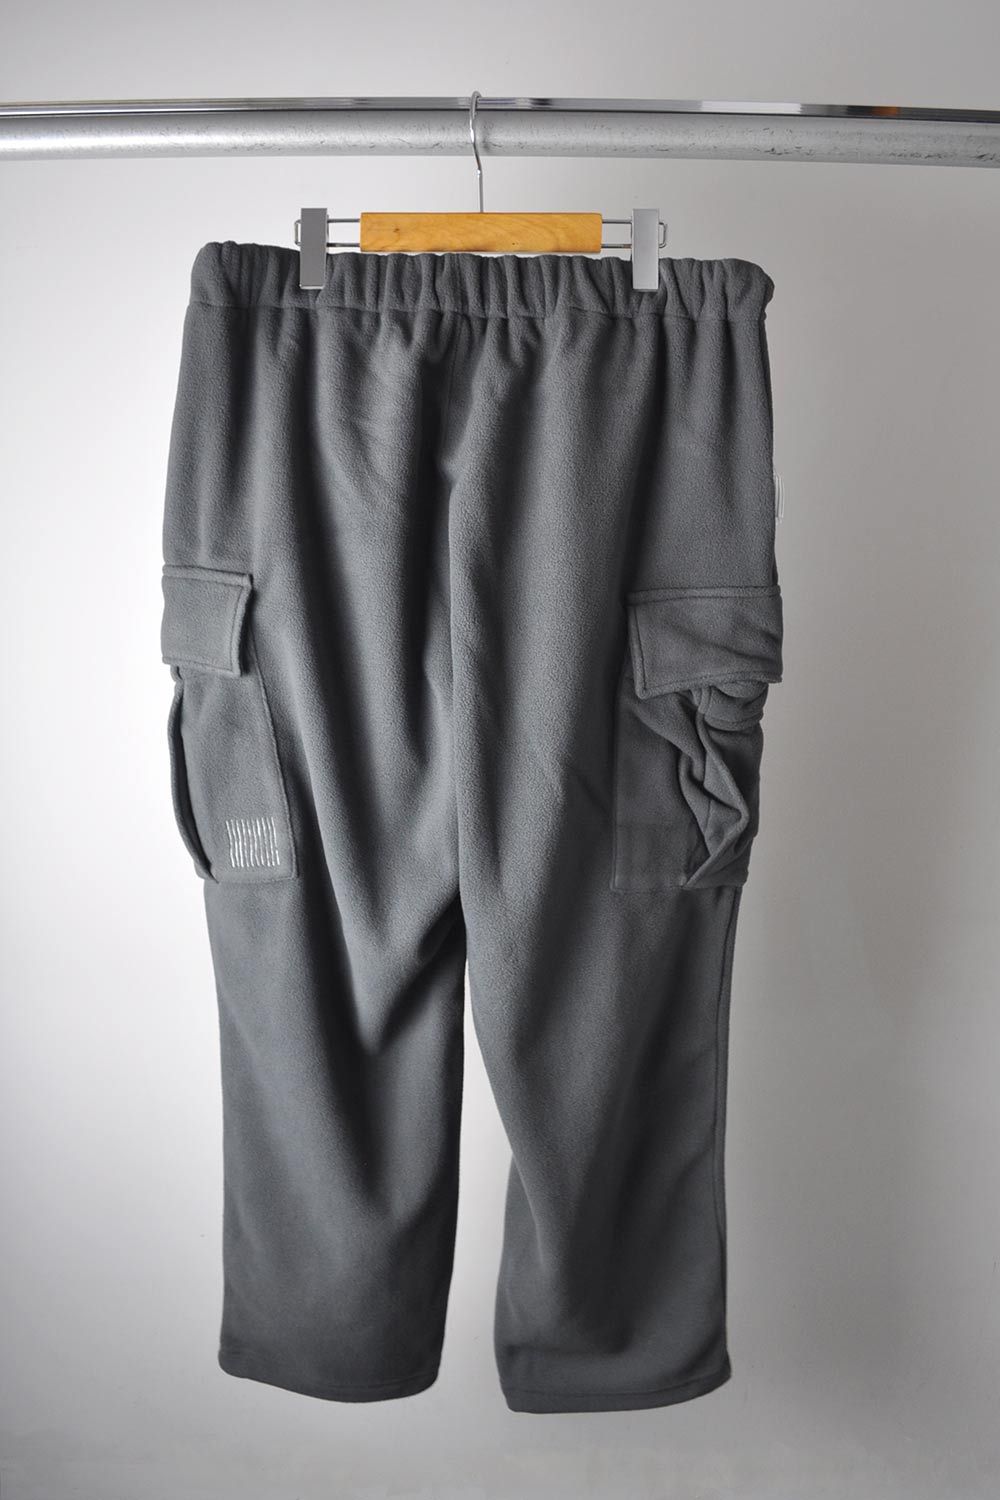 Stripes For Creative - CARGO PANTS. | Stripe Online Store